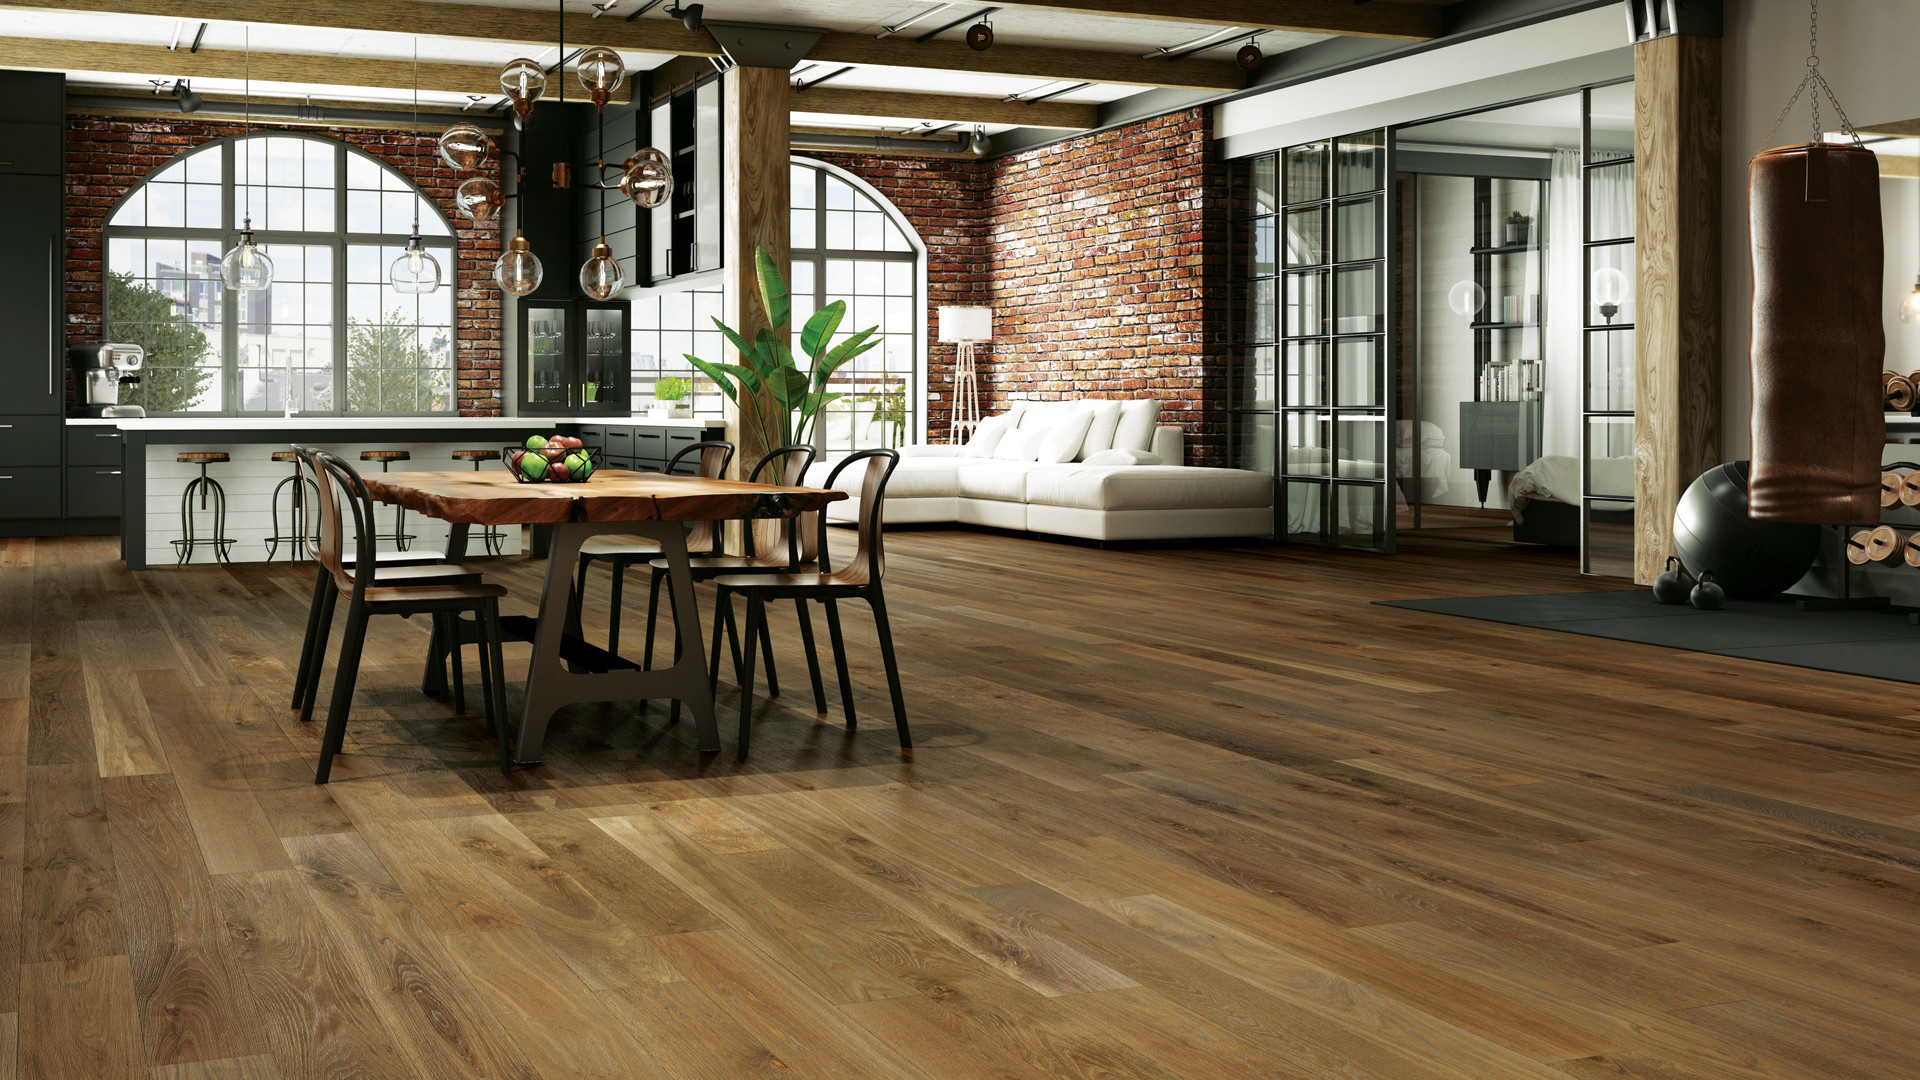 15 Lovely Can U Put Hardwood Floor On Concrete 2024 free download can u put hardwood floor on concrete of 4 latest hardwood flooring trends of 2018 lauzon flooring inside combined with a wire brushed texture and an ultra matte sheen these new 7ac2bd wide w